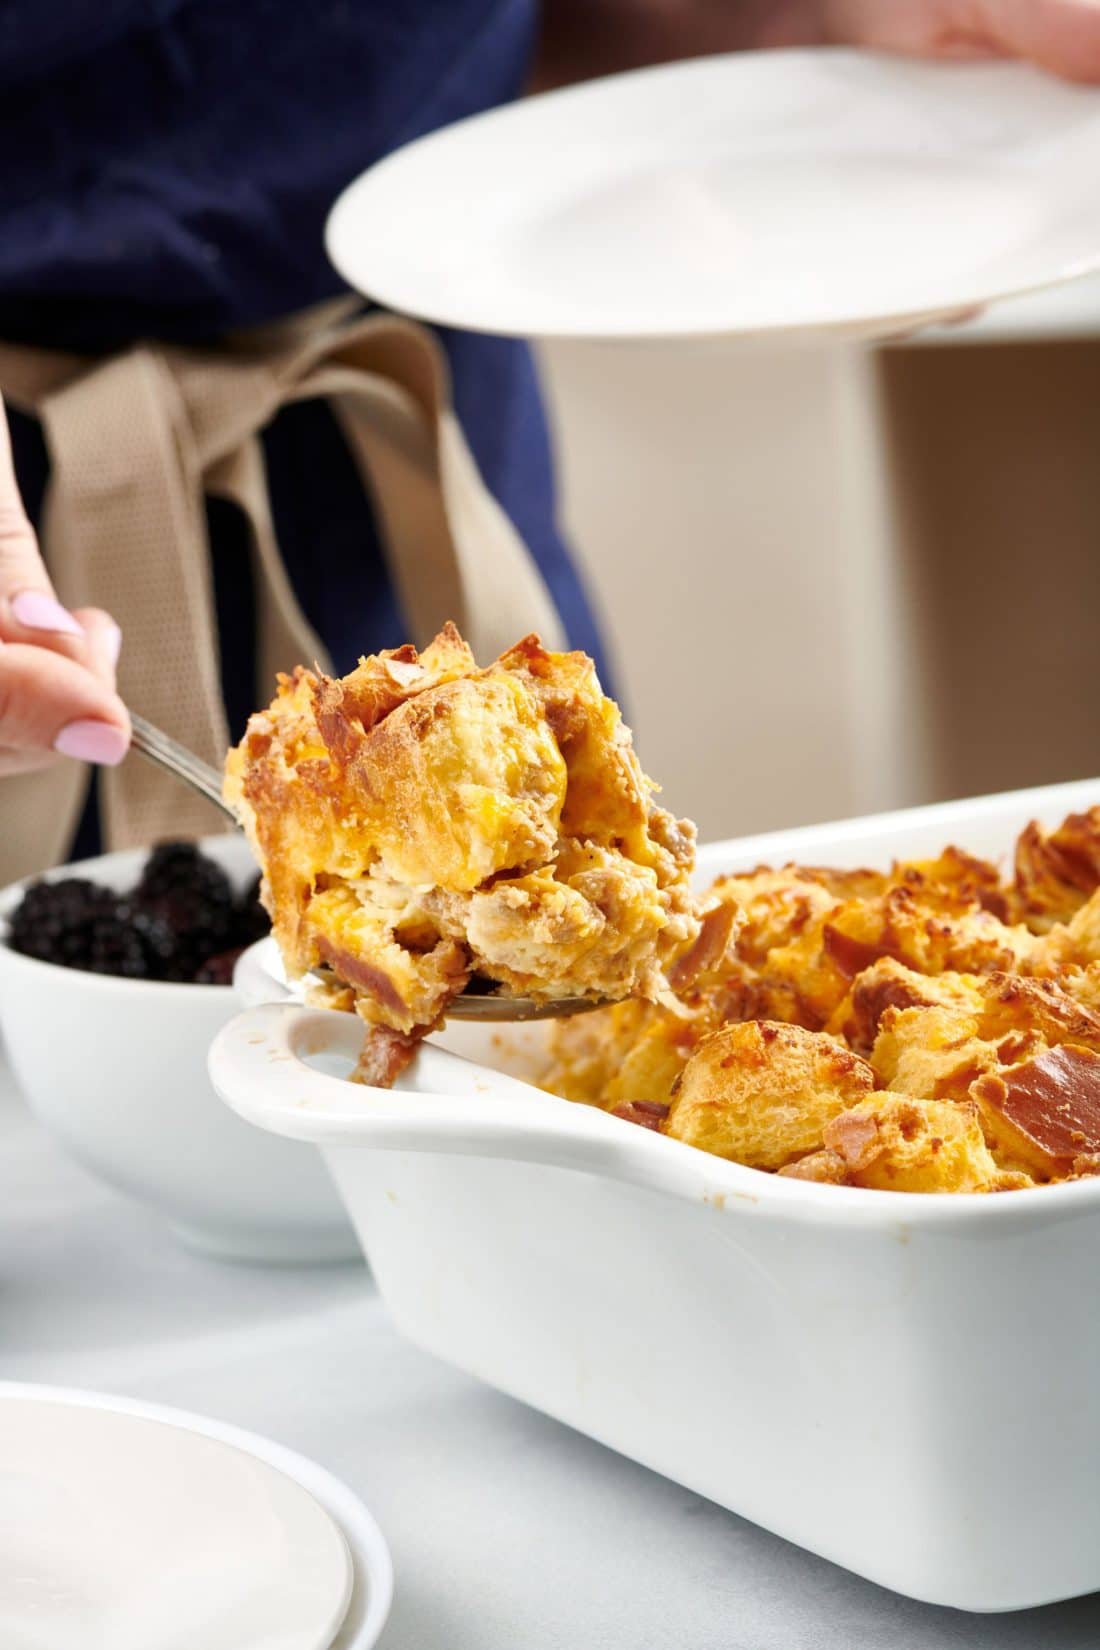 Woman scooping Savory Challah Bread Pudding from a baking dish.